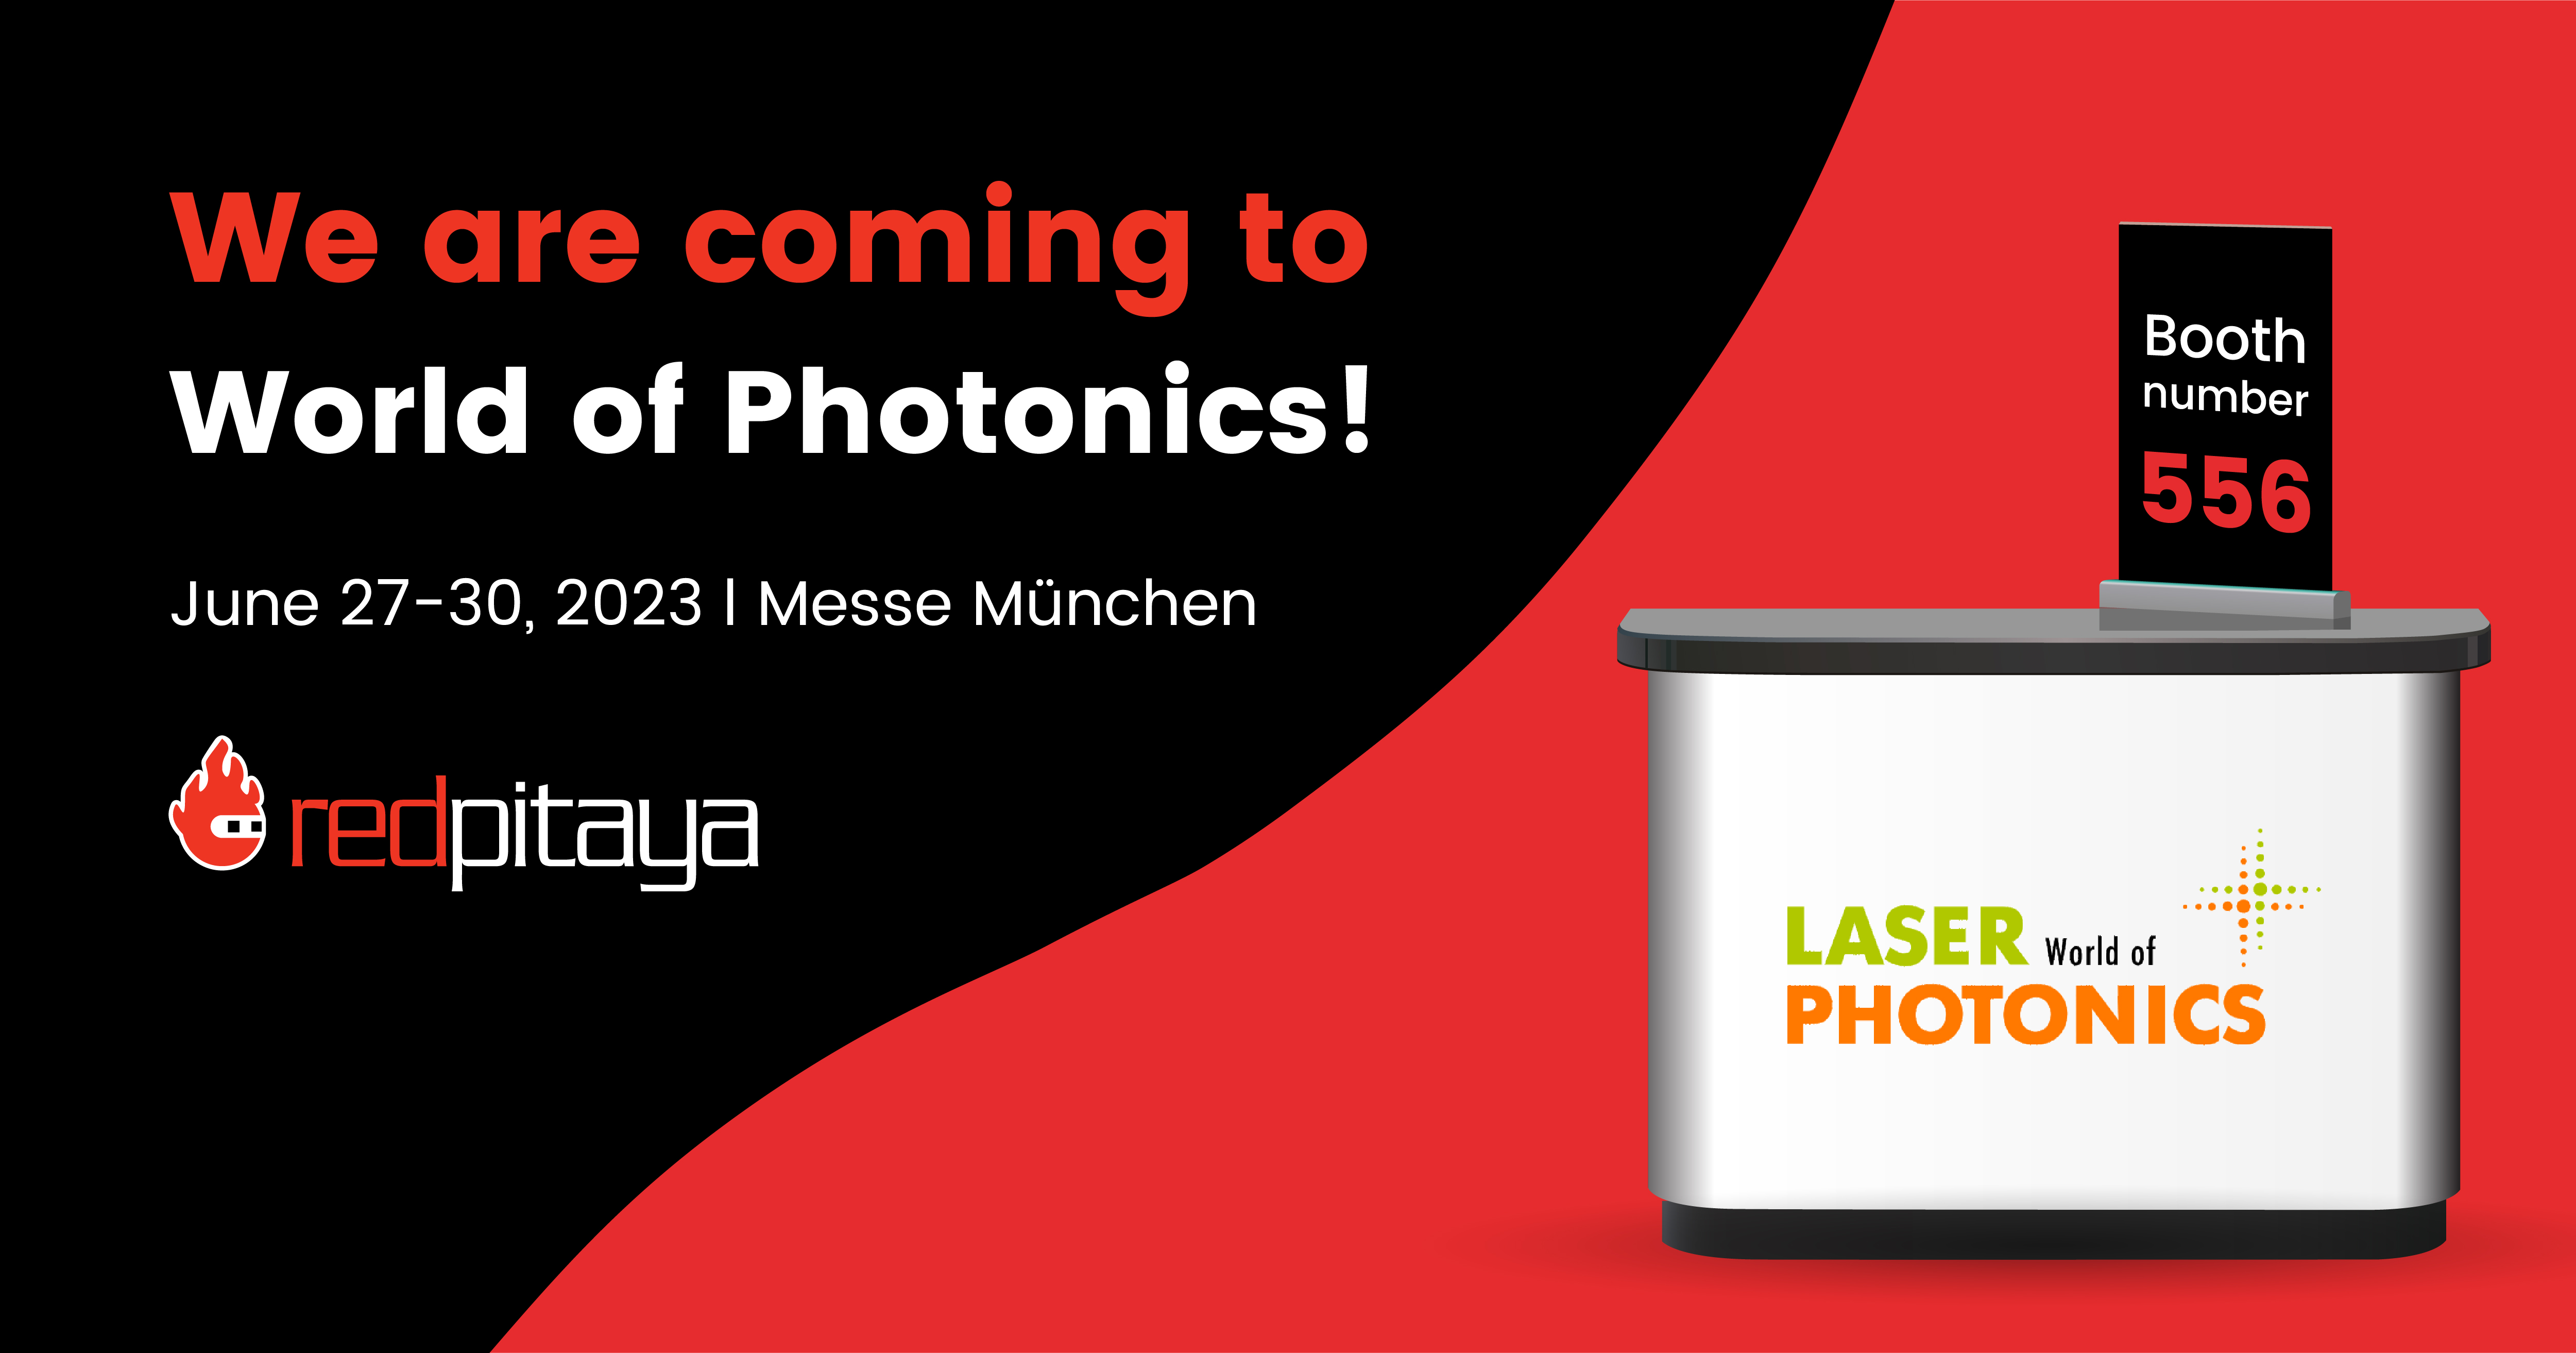 We are coming to Laser World of Photonics 2023